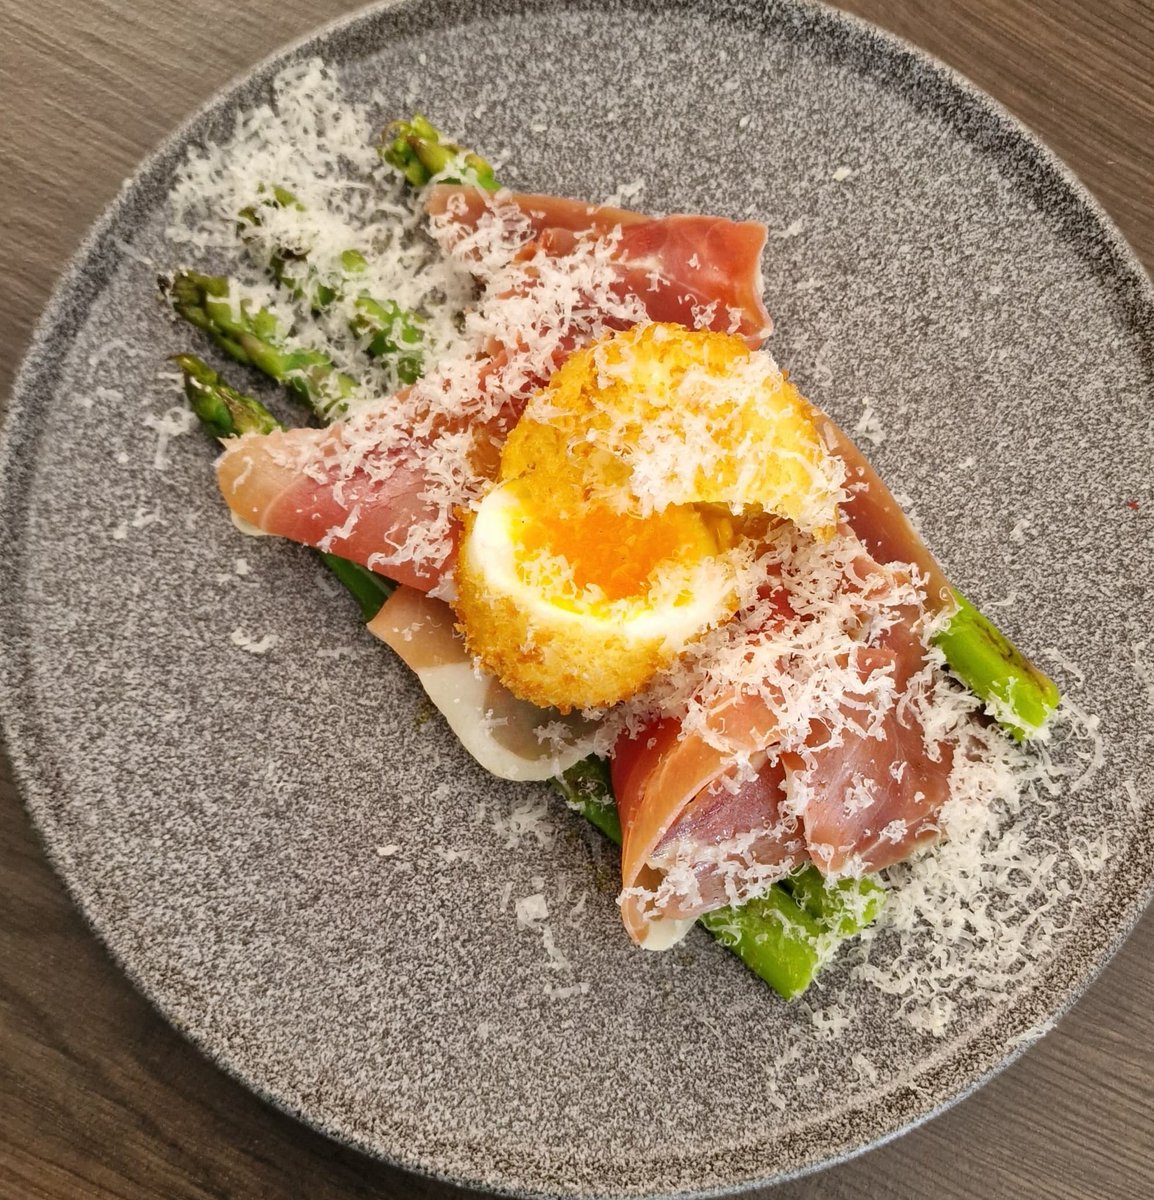 Some delicious new items on our A La Carte Evening Dining Menu, for the Summer Season, which we will showcase here for you this week. Staring with this beauty of a starter: Grilled Asparagus, Serano Ham, Crispy Coated Soft Egg, 18 Month Parmigiano Reggiano #10westbistro